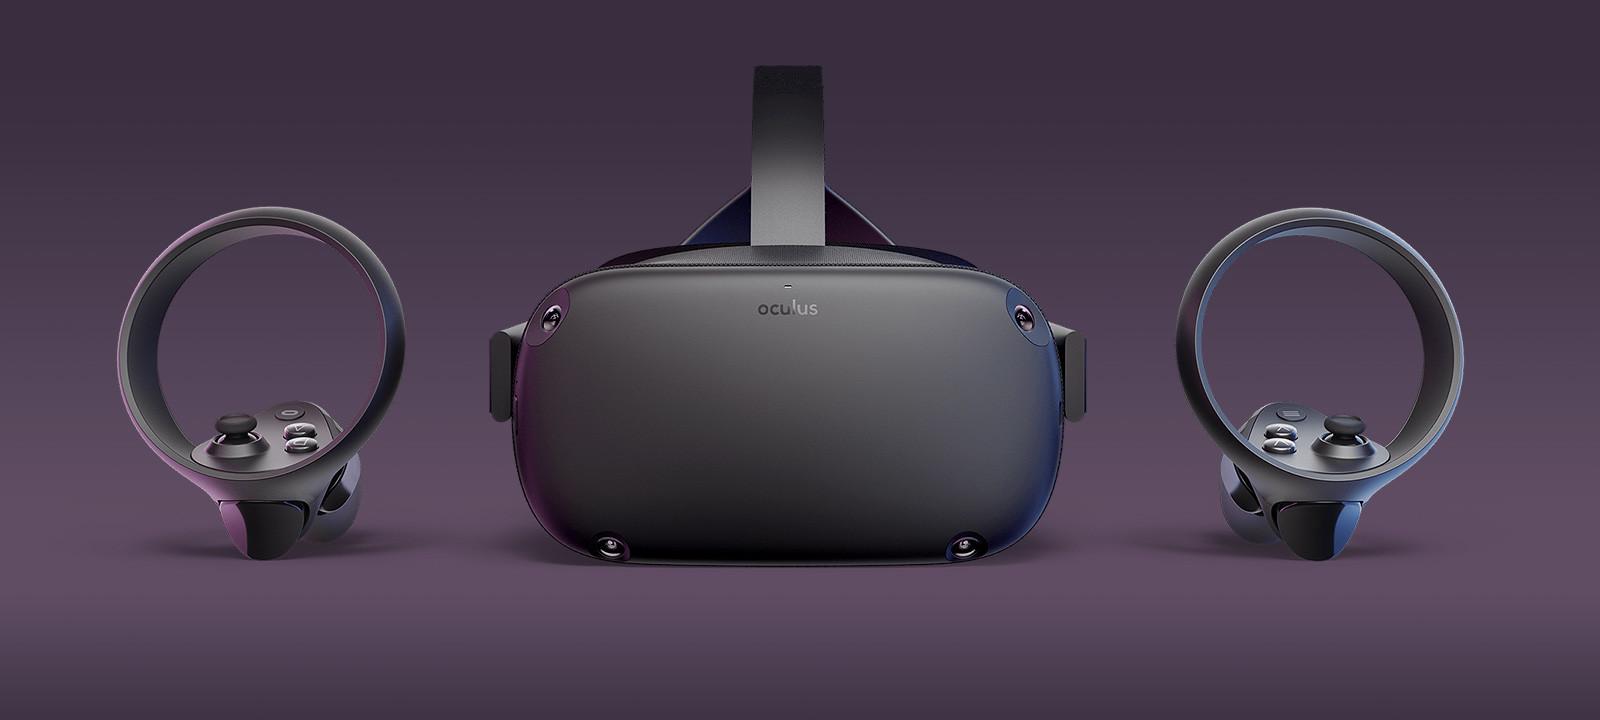 Oculus Quest Review: The Best VR Headset of 2019 Piviral